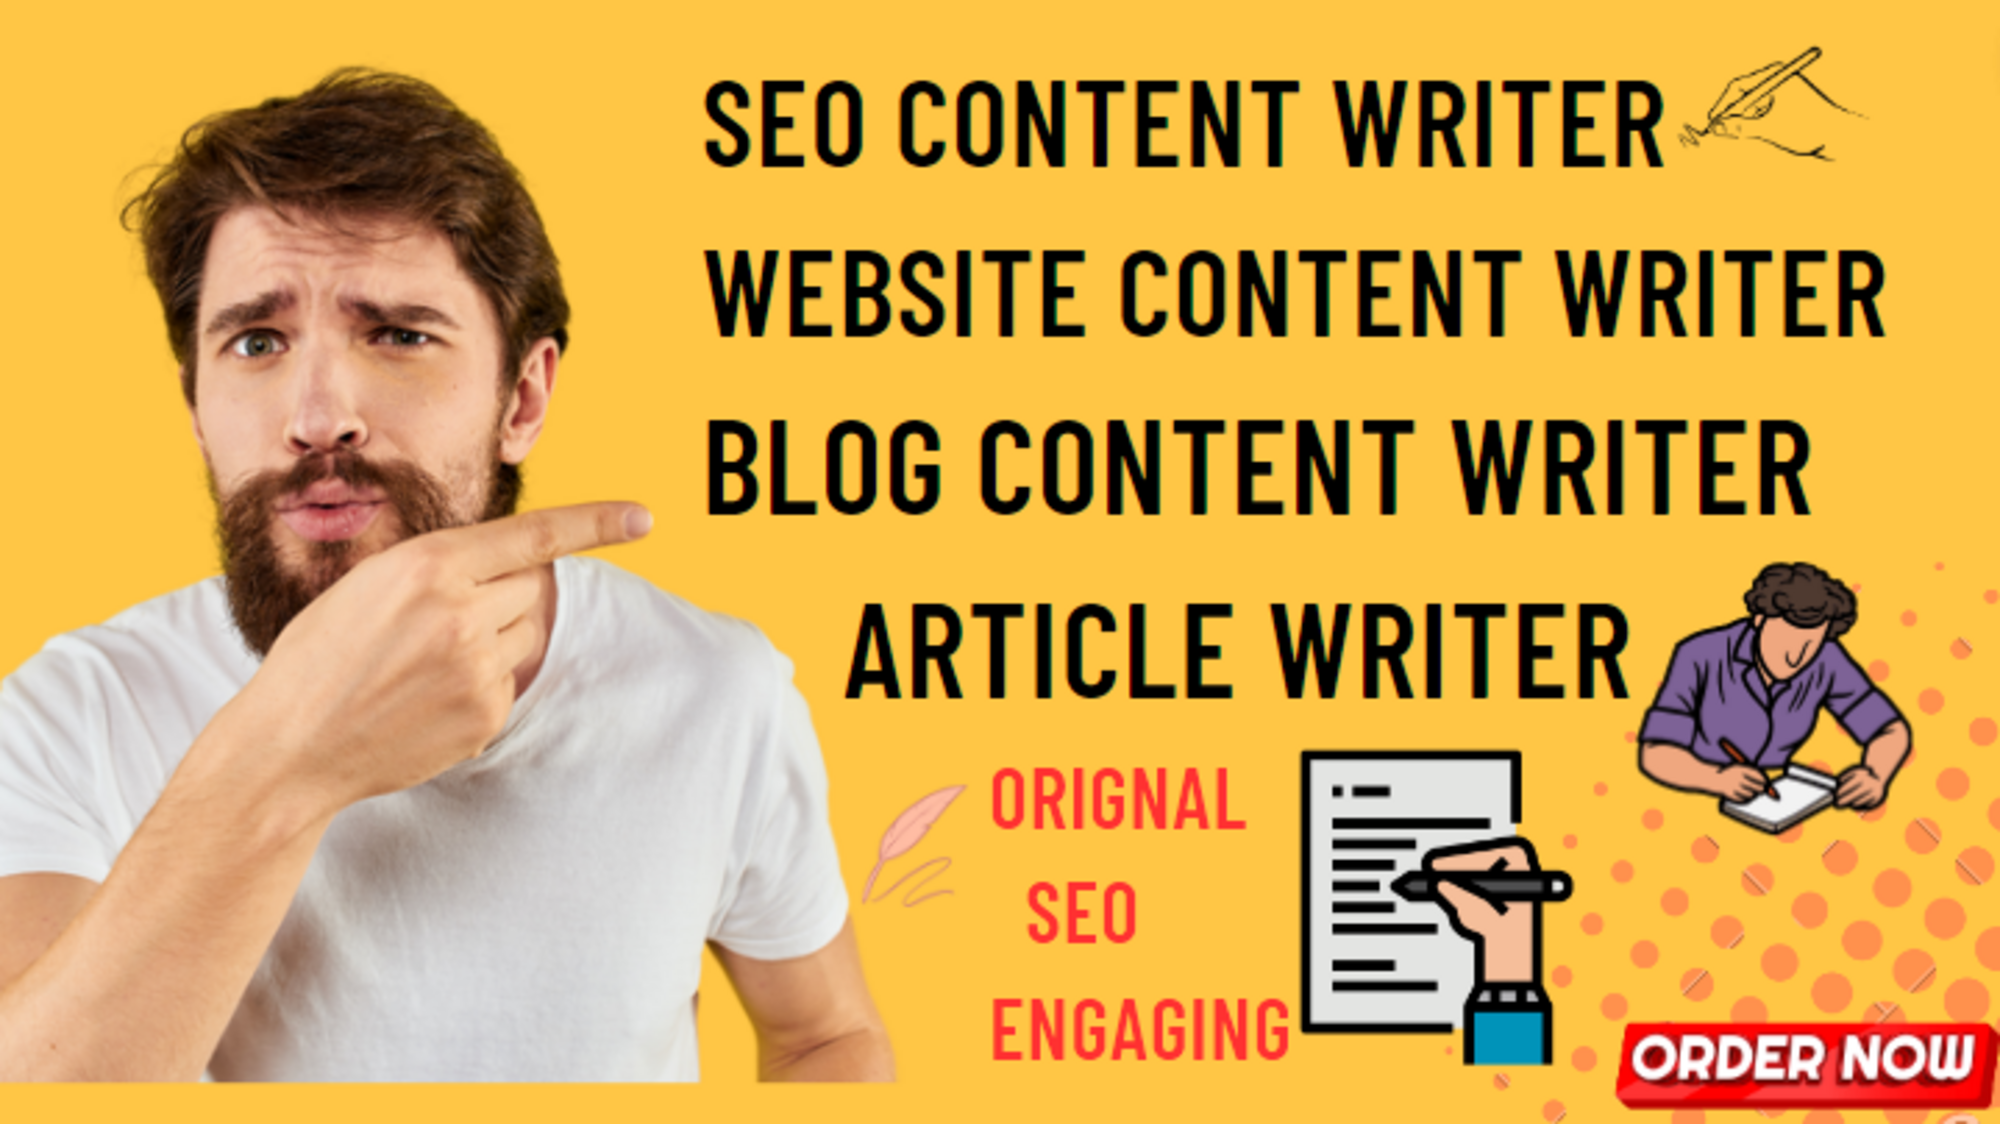 156069I will write engaging seo articles blog post copywriting for you